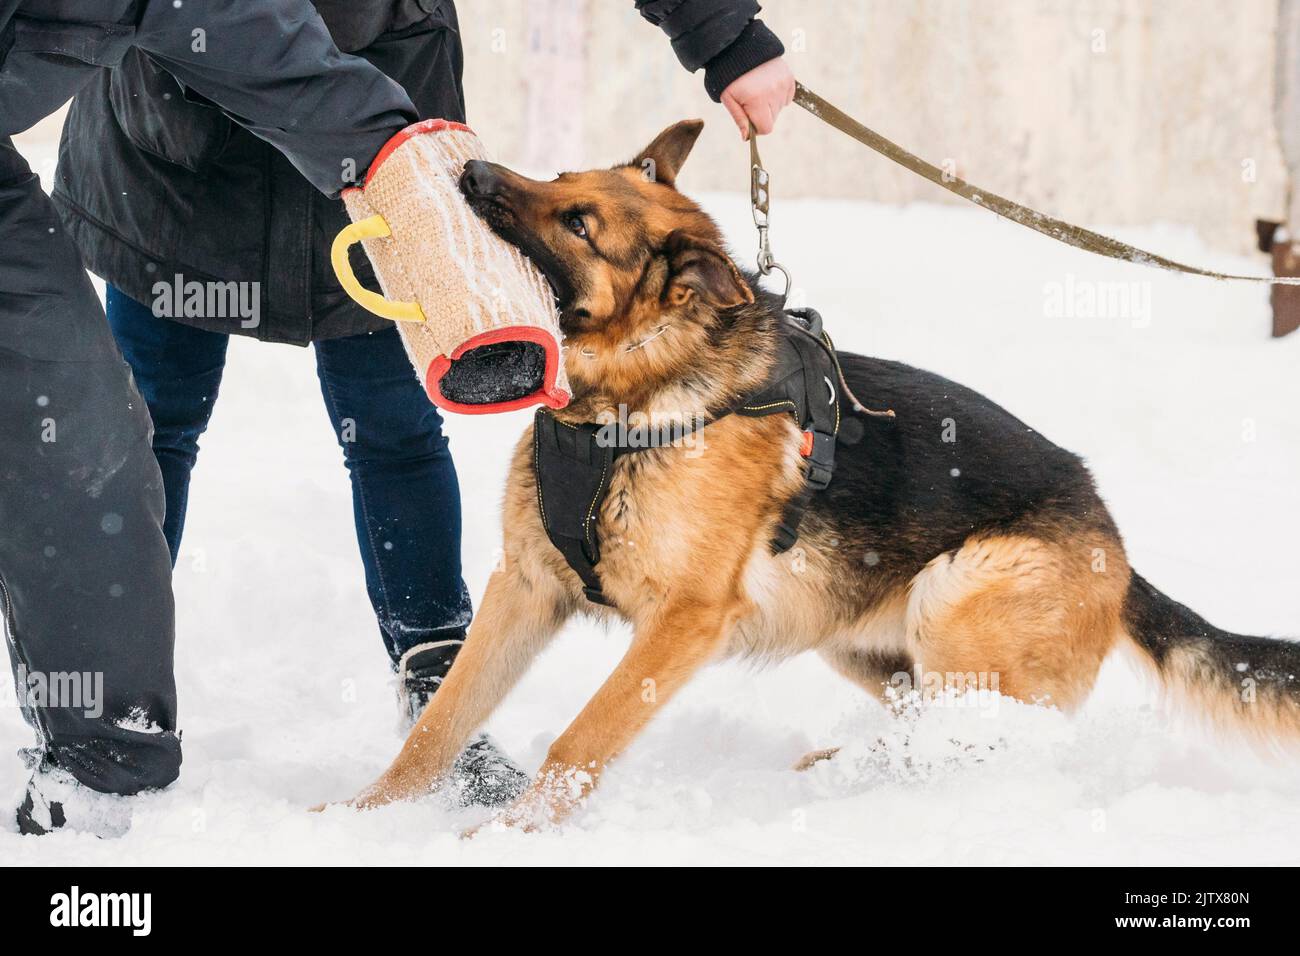 Training Of Purebred German Shepherd Young Dog Or Alsatian Wolf Dog. Attack And Defence. Winter Season. Stock Photo